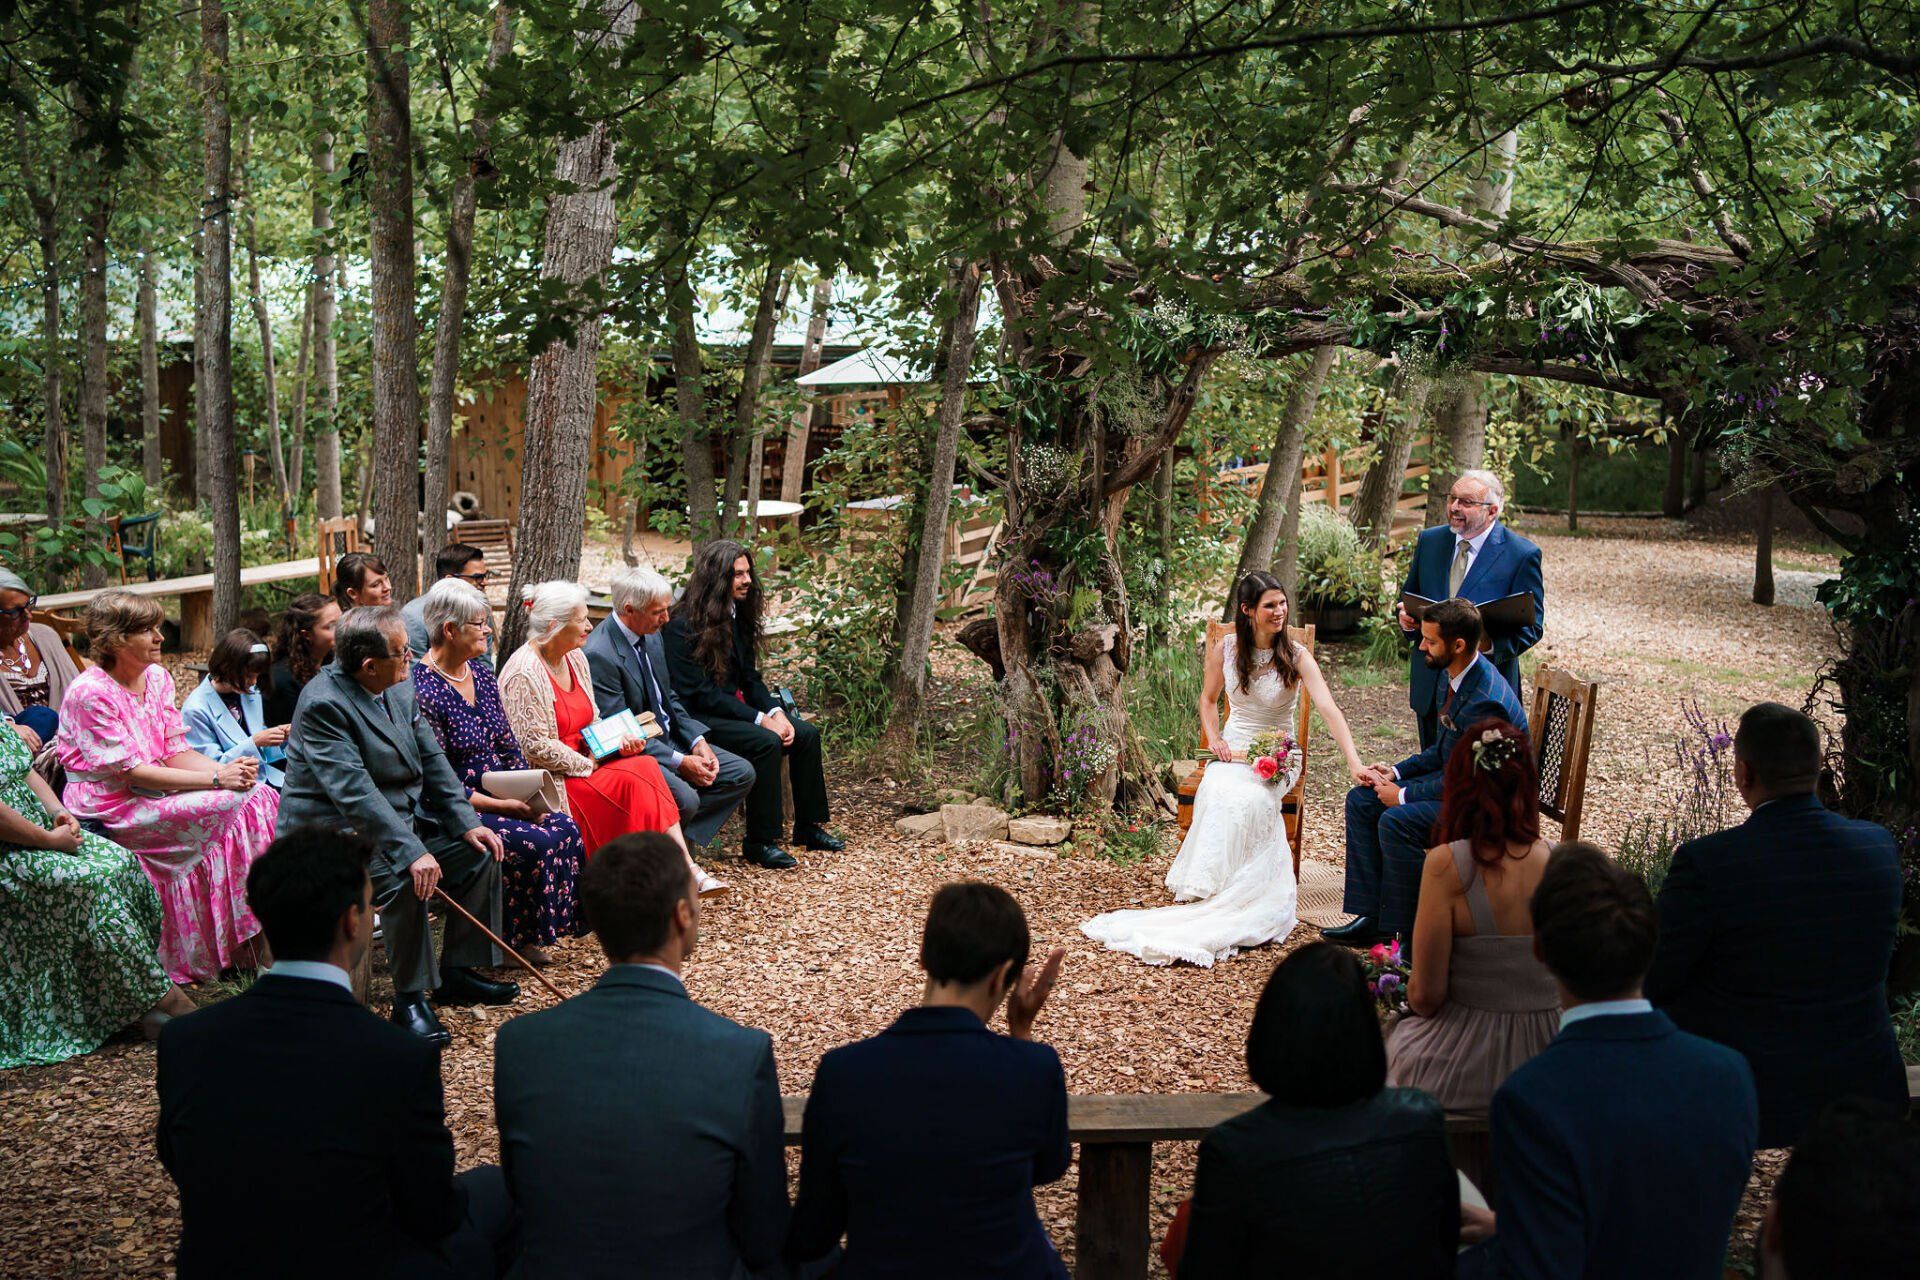 wedding Ceremony by Paul Skone and photography by Brad Gommon